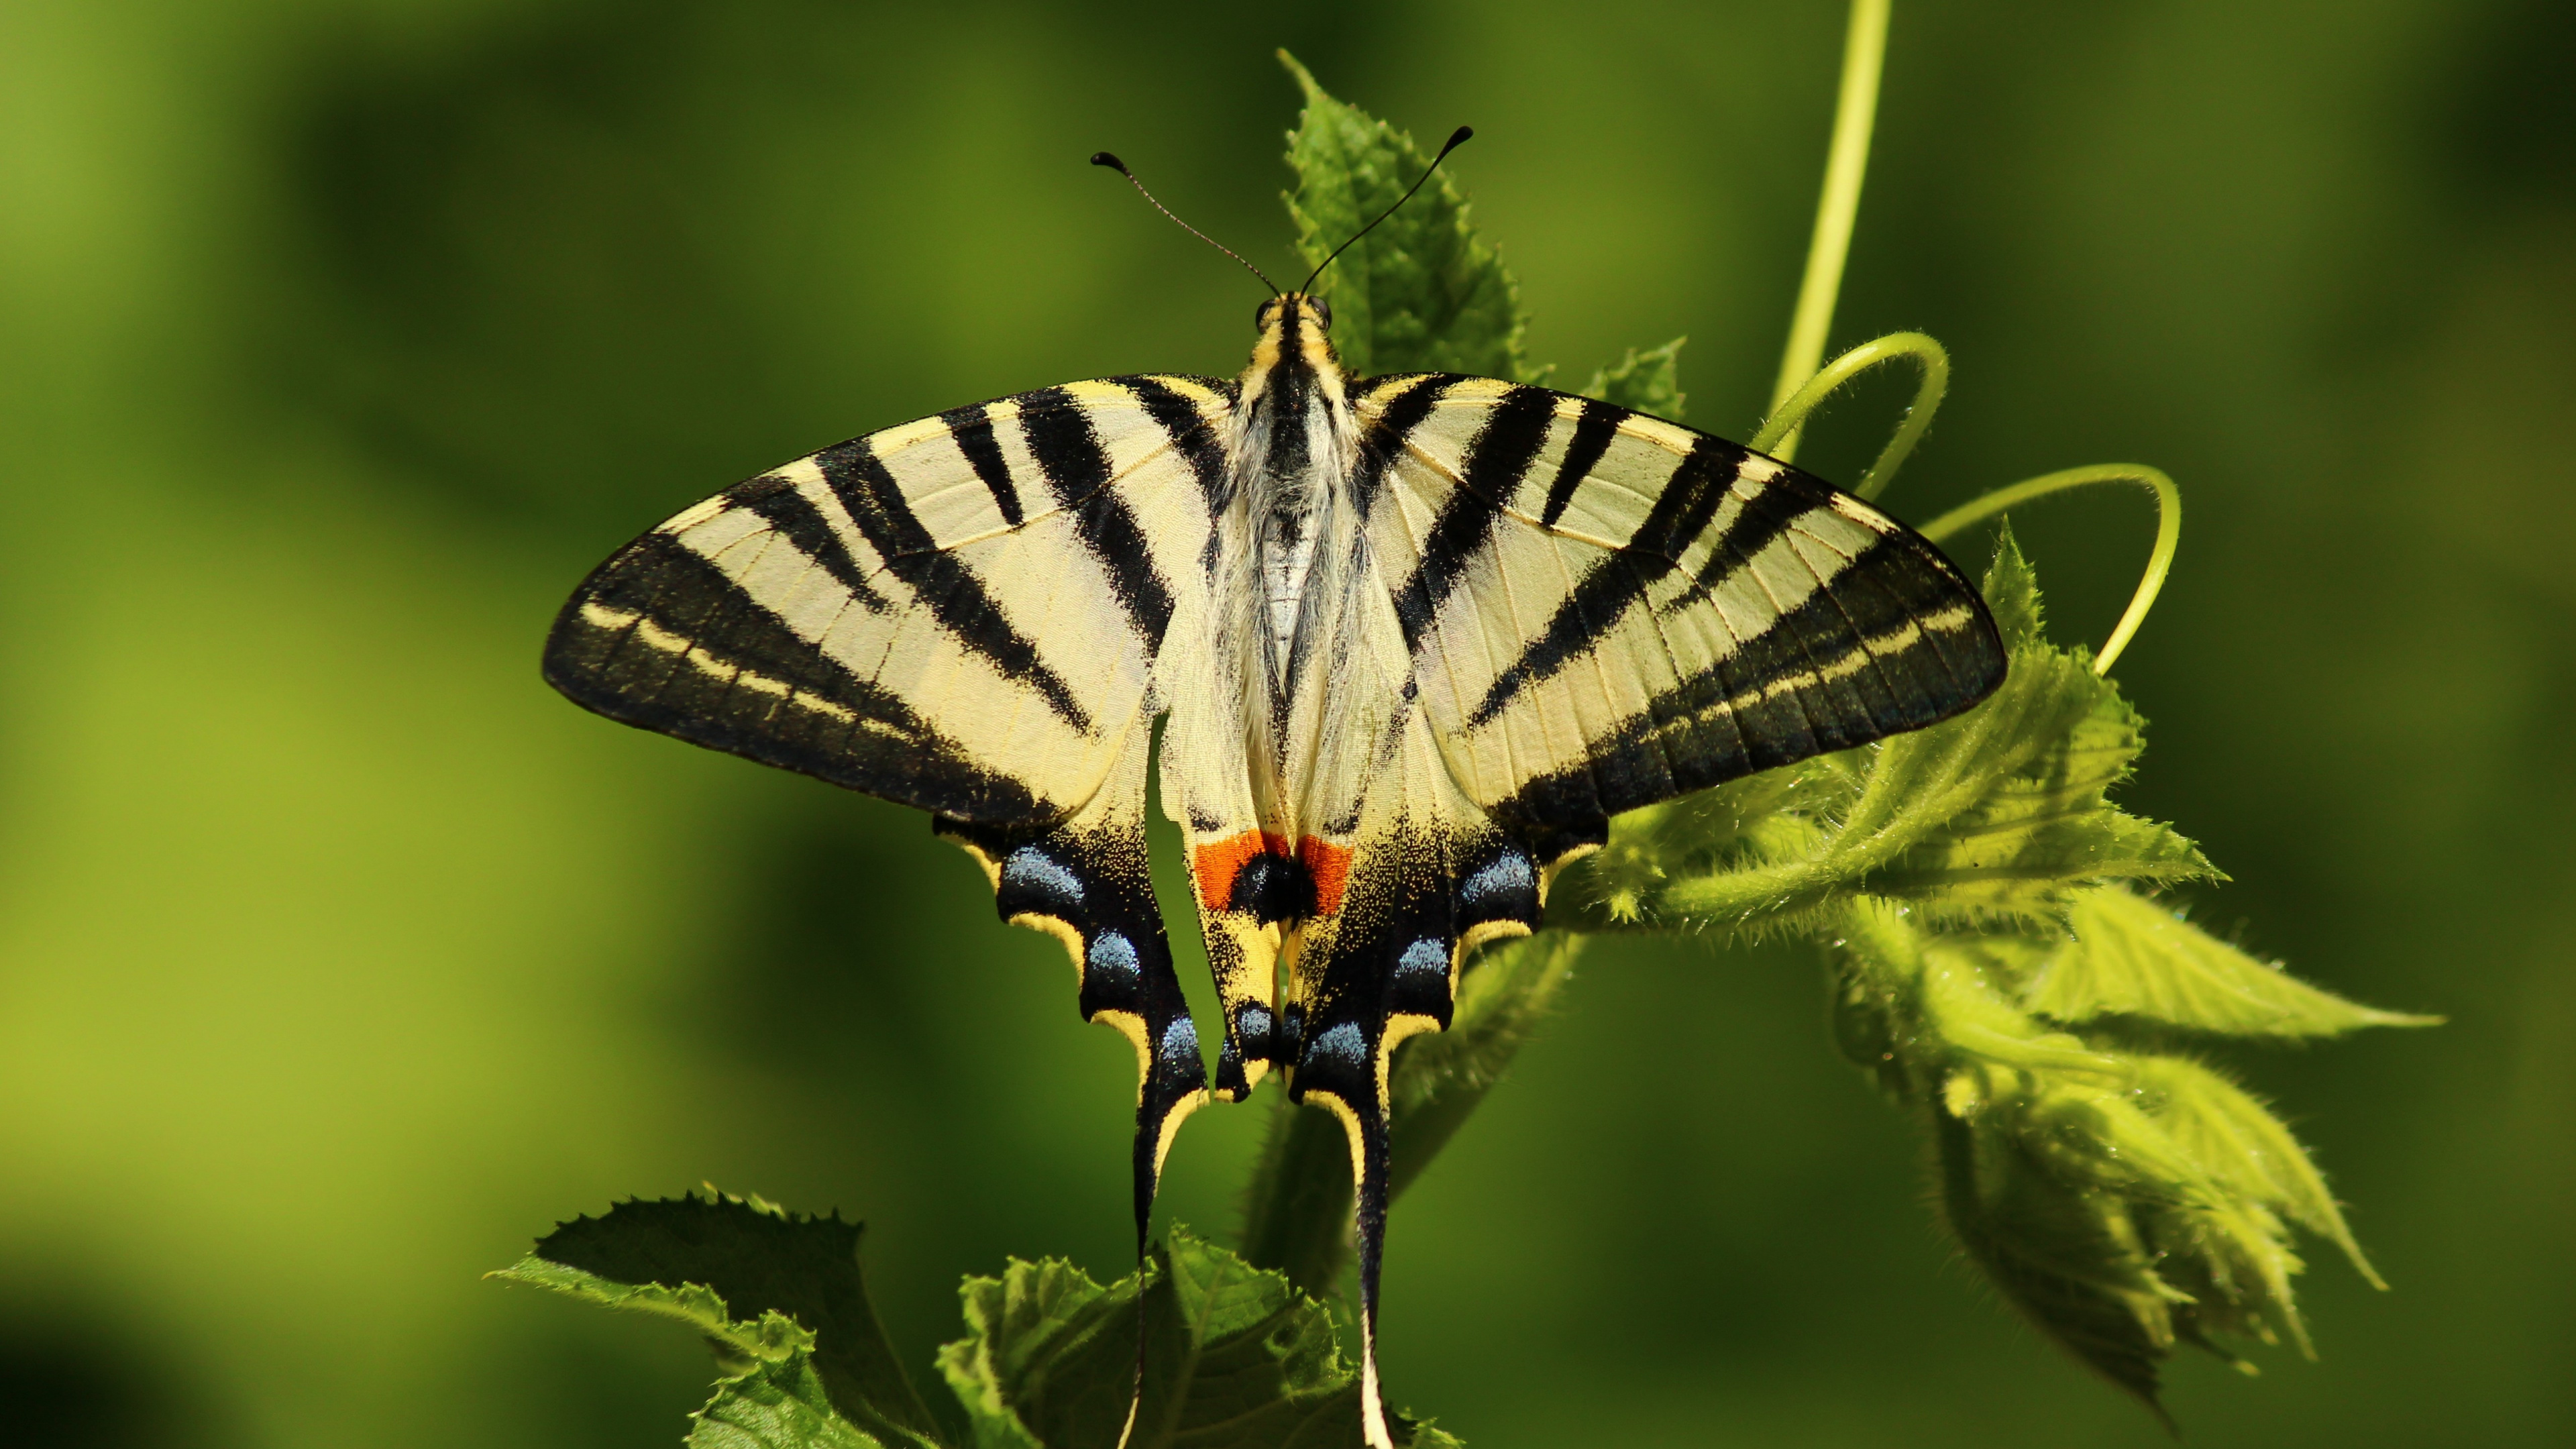 Zebra Swallowtail Butterfly Perched on Green Leaf in Close up Photography During Daytime. Wallpaper in 3840x2160 Resolution